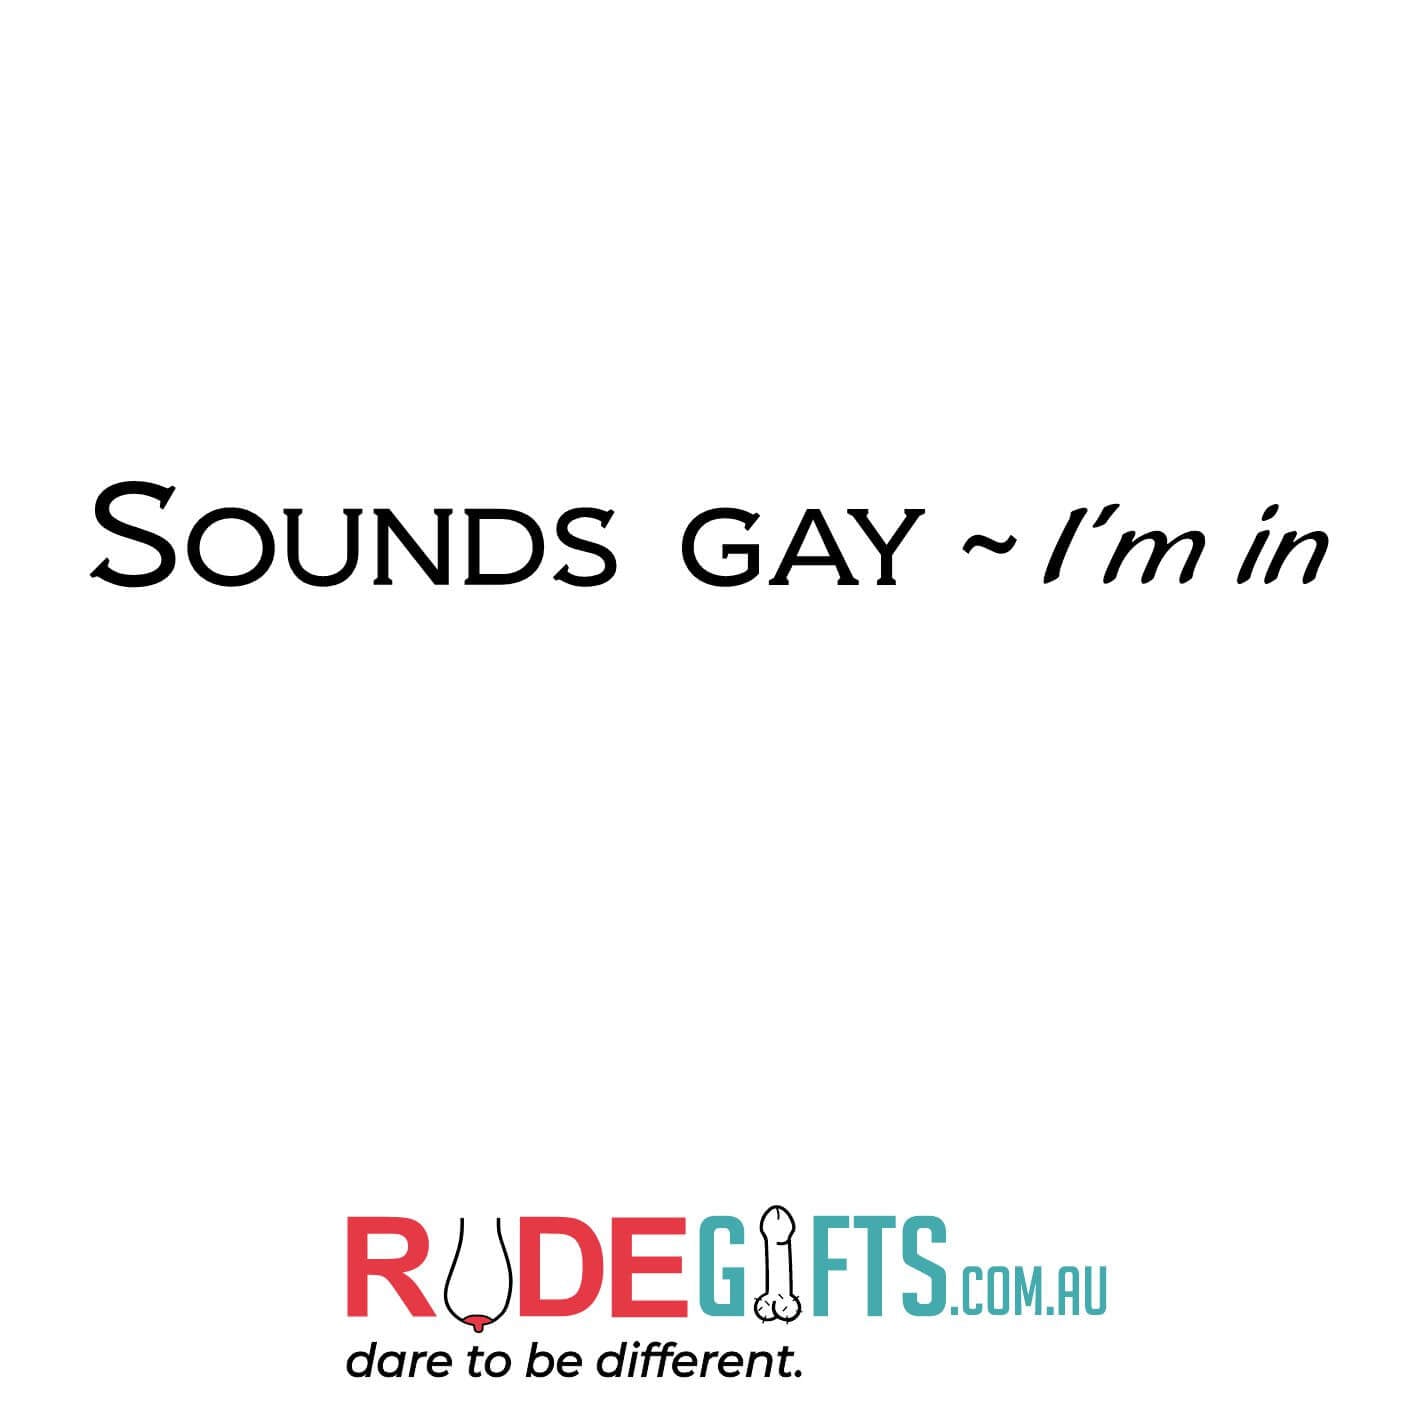 Sounds gay ~ I'm in - 0